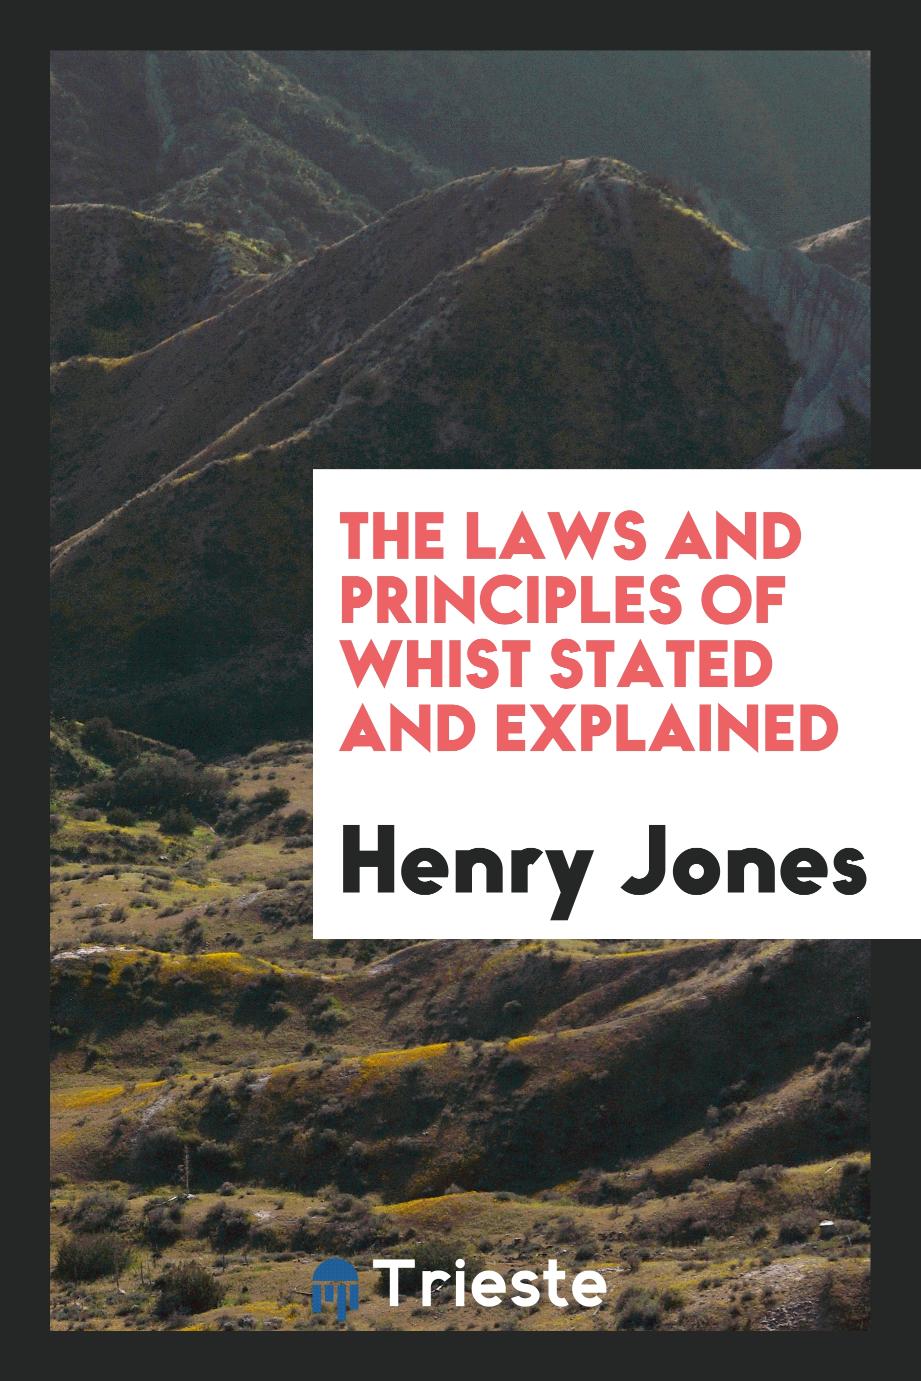 The Laws and Principles of Whist Stated and Explained